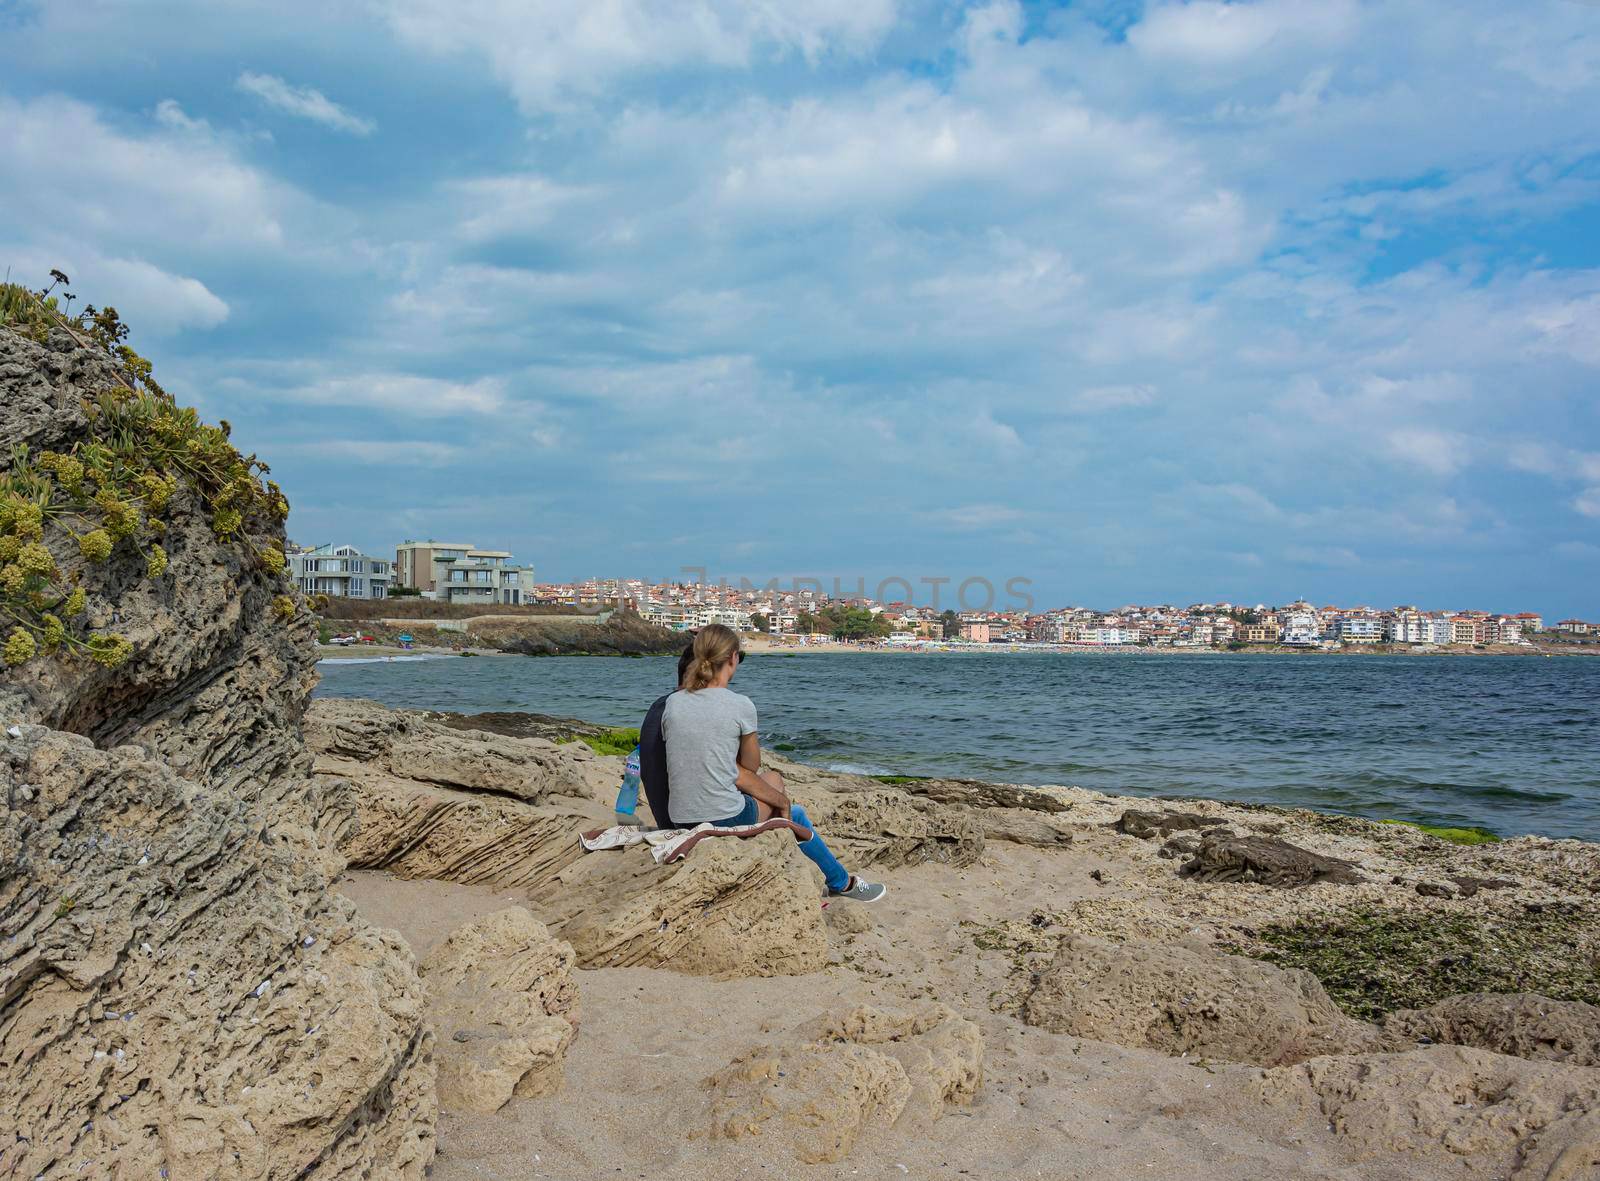 Bulgaria, Sozopol - 2018, 06 September: A girl with a guy sitting on a rocky beach, blurred background. Stock photo.